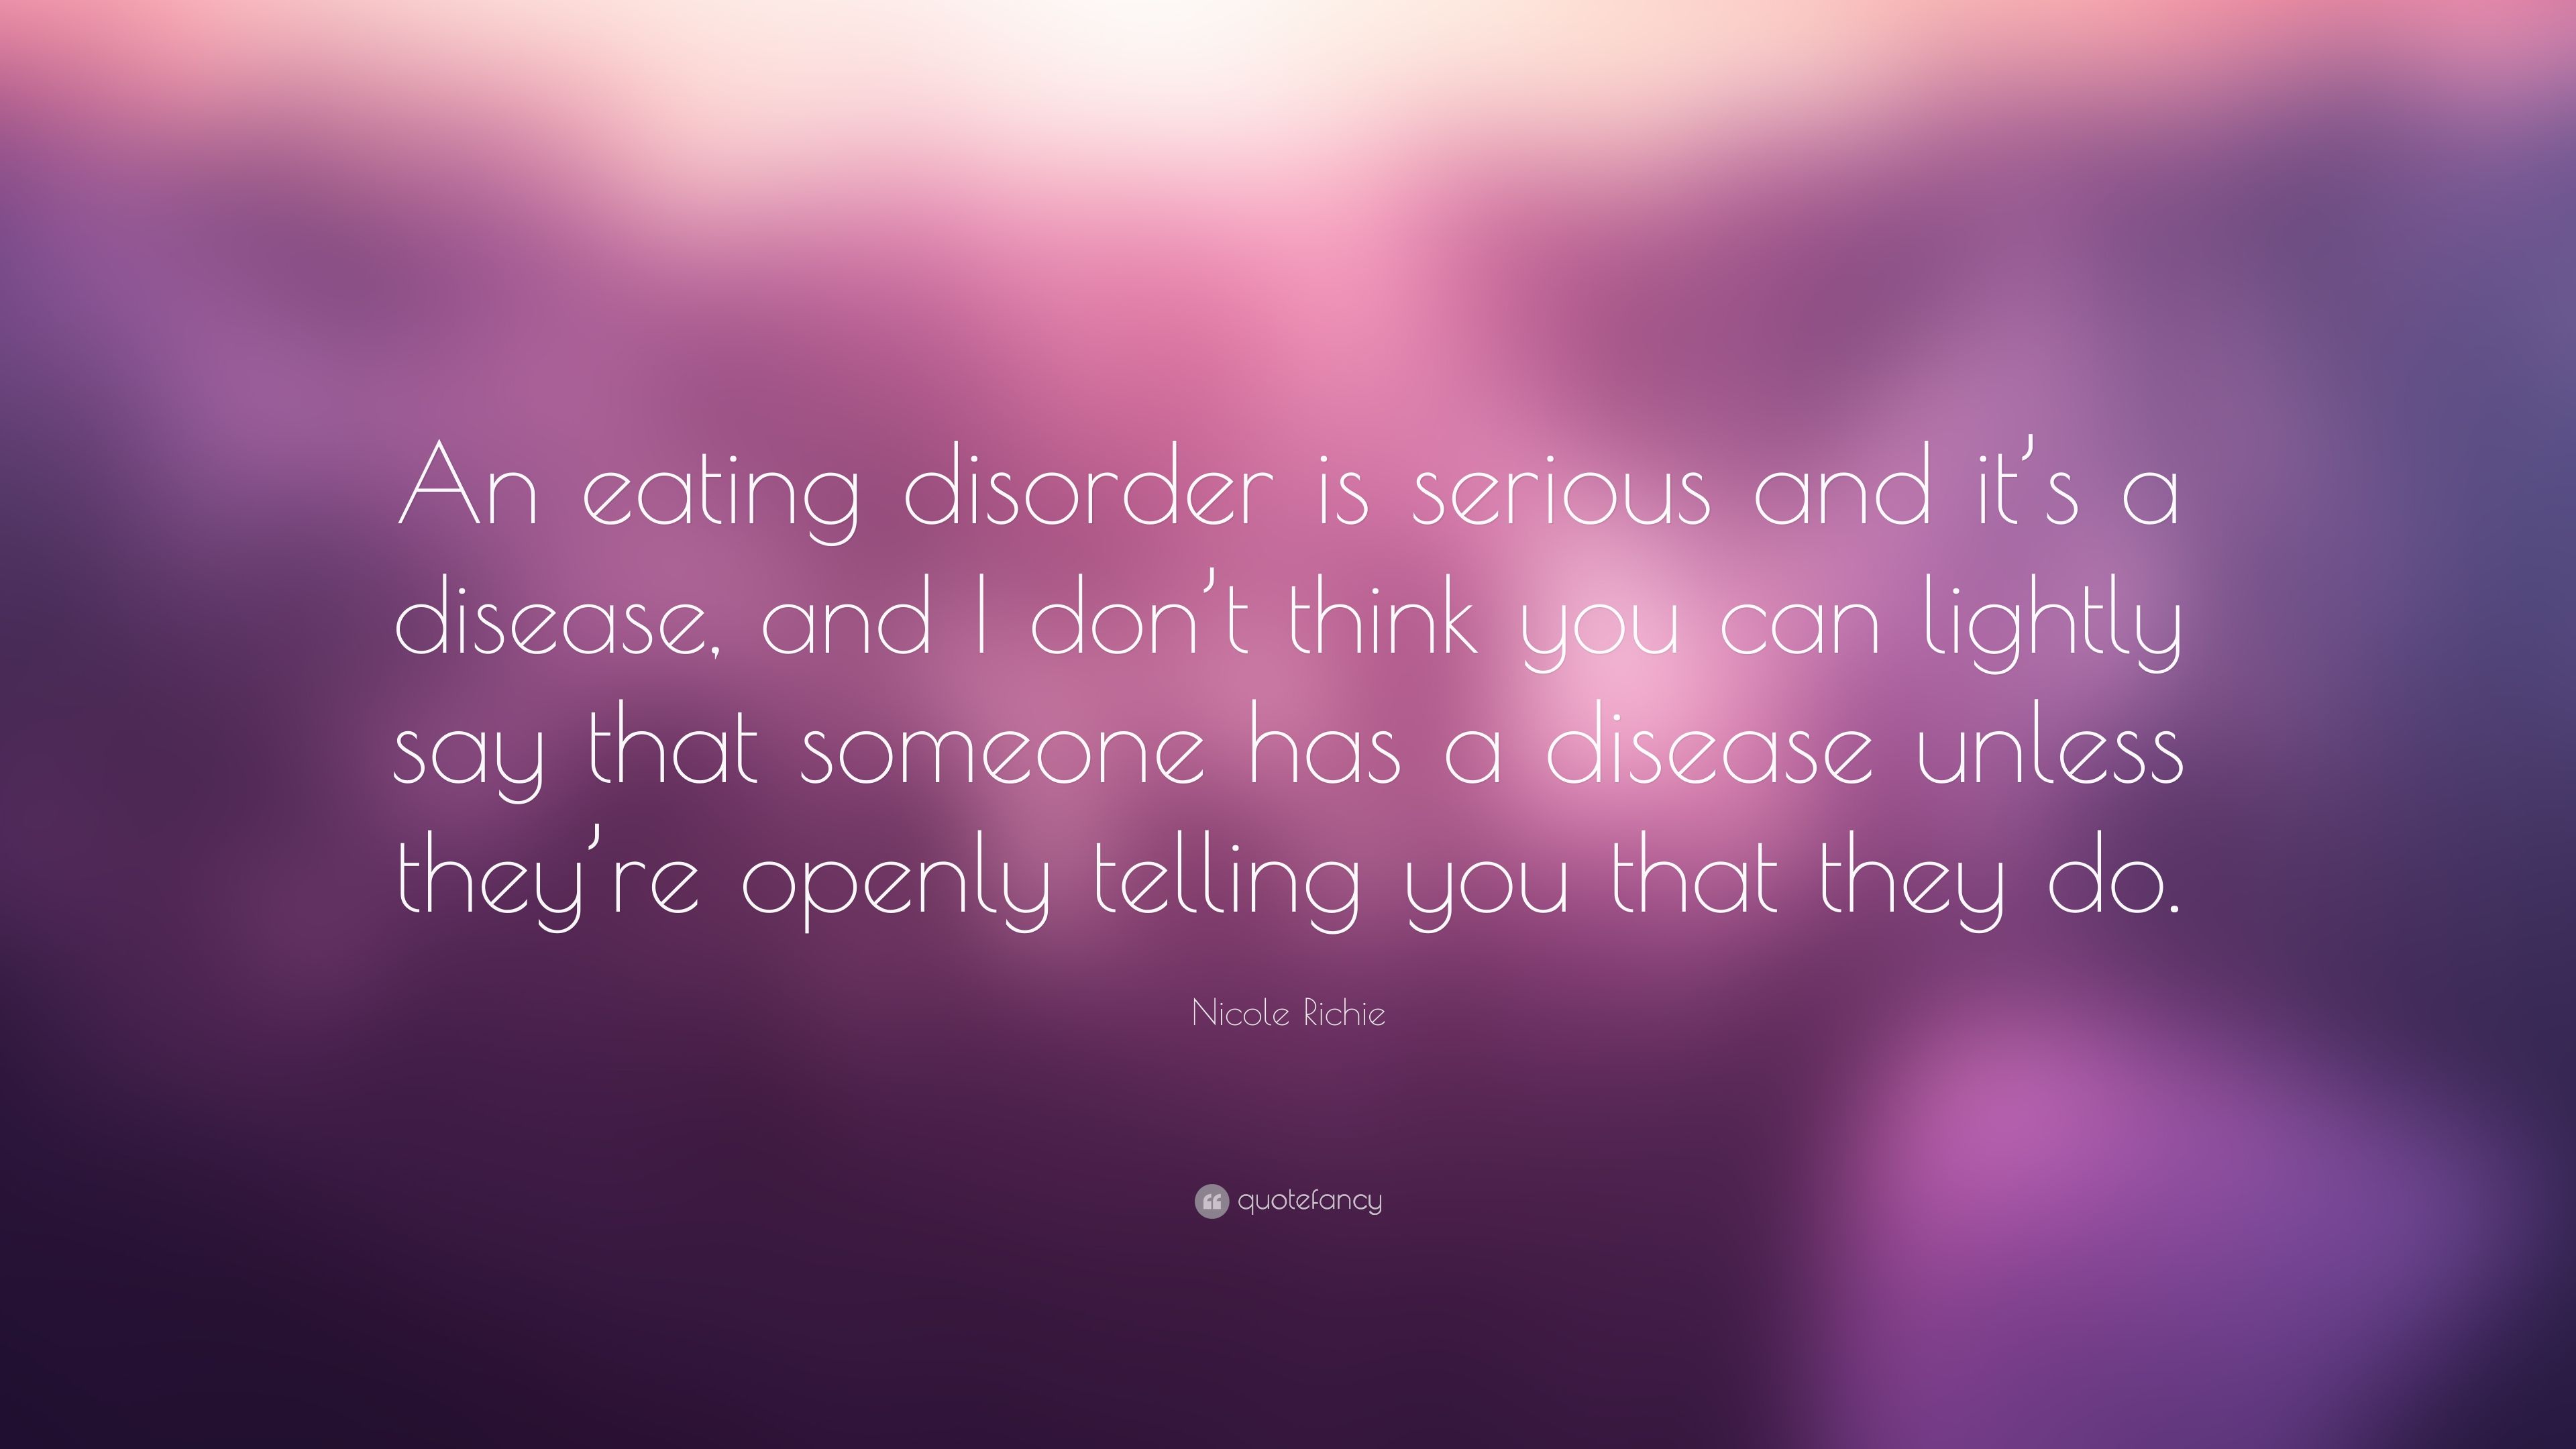 Nicole Richie Quote: “An eating disorder is serious and it's a disease, and I don't think you can lightly say that someone has a disease unles.” (7 wallpaper)